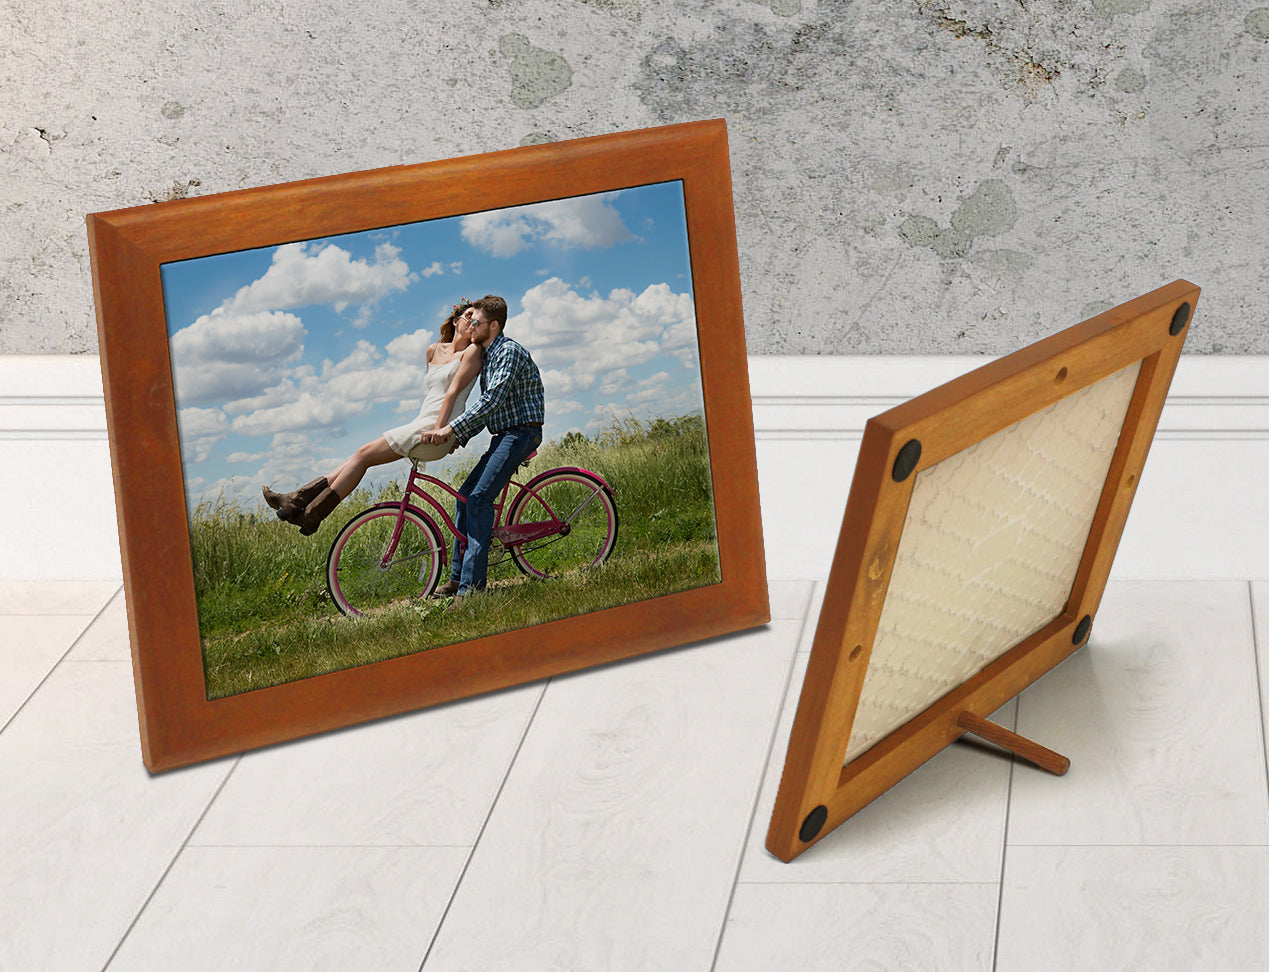 Ceramic Photo tile with wooden frame on table